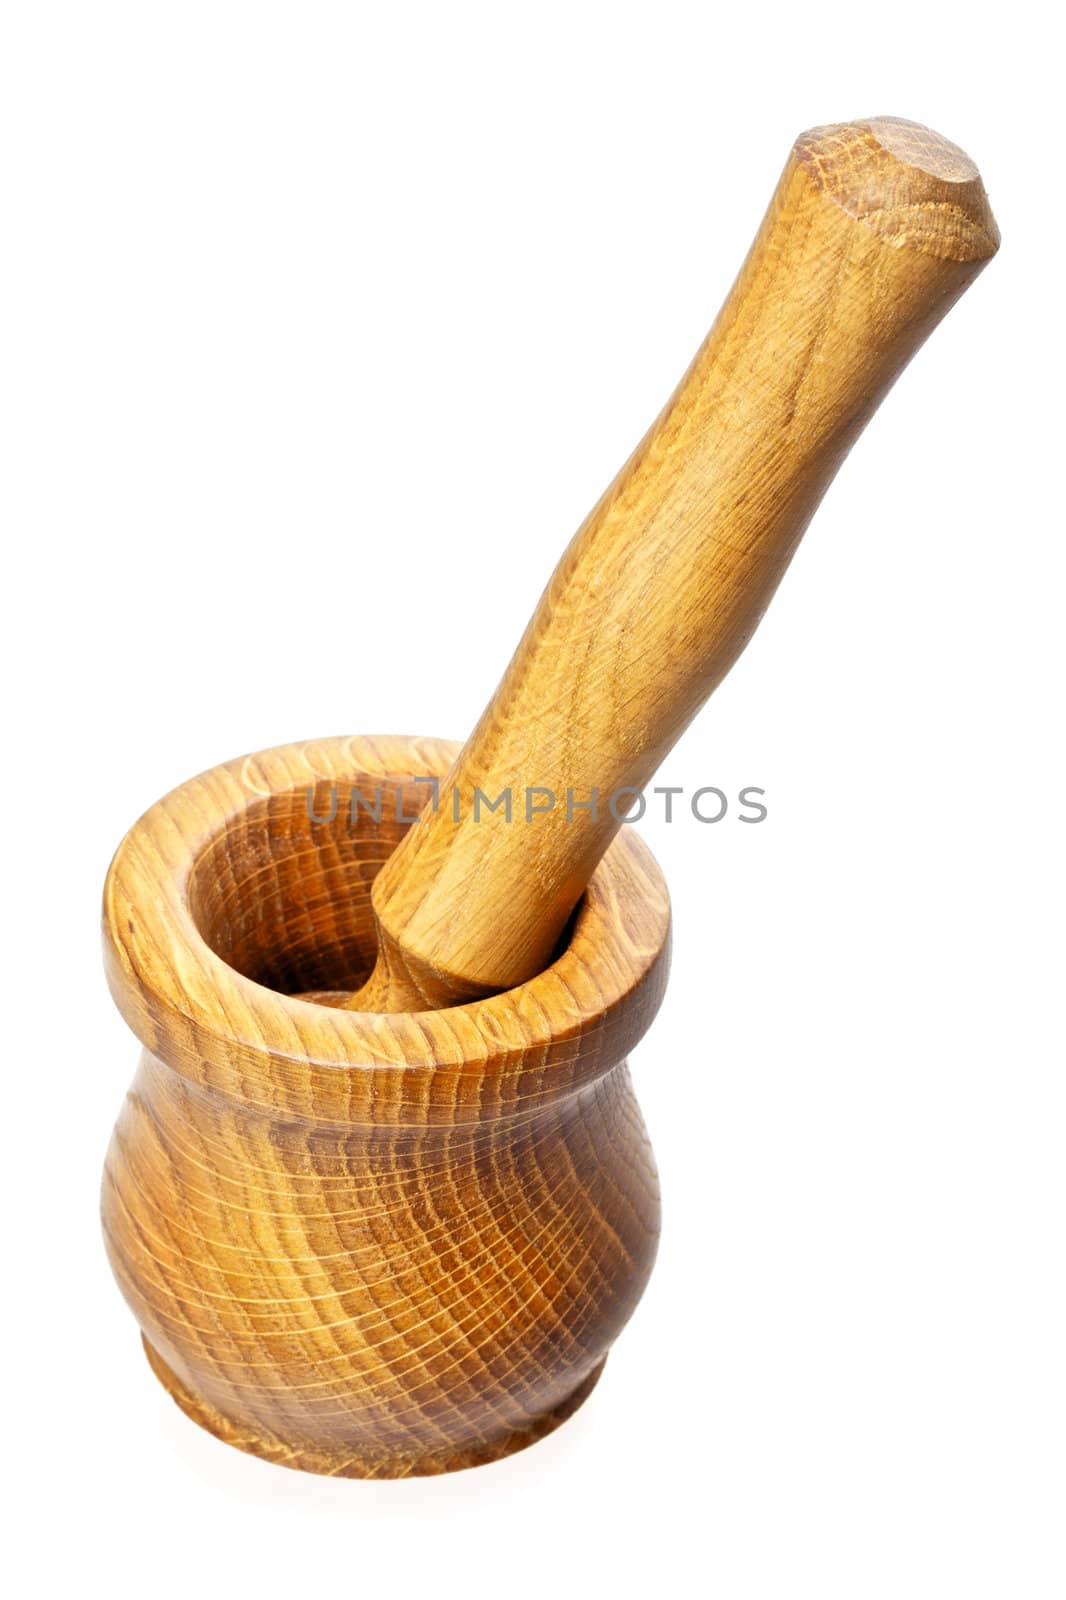 Mortar With Pestle by petr_malyshev